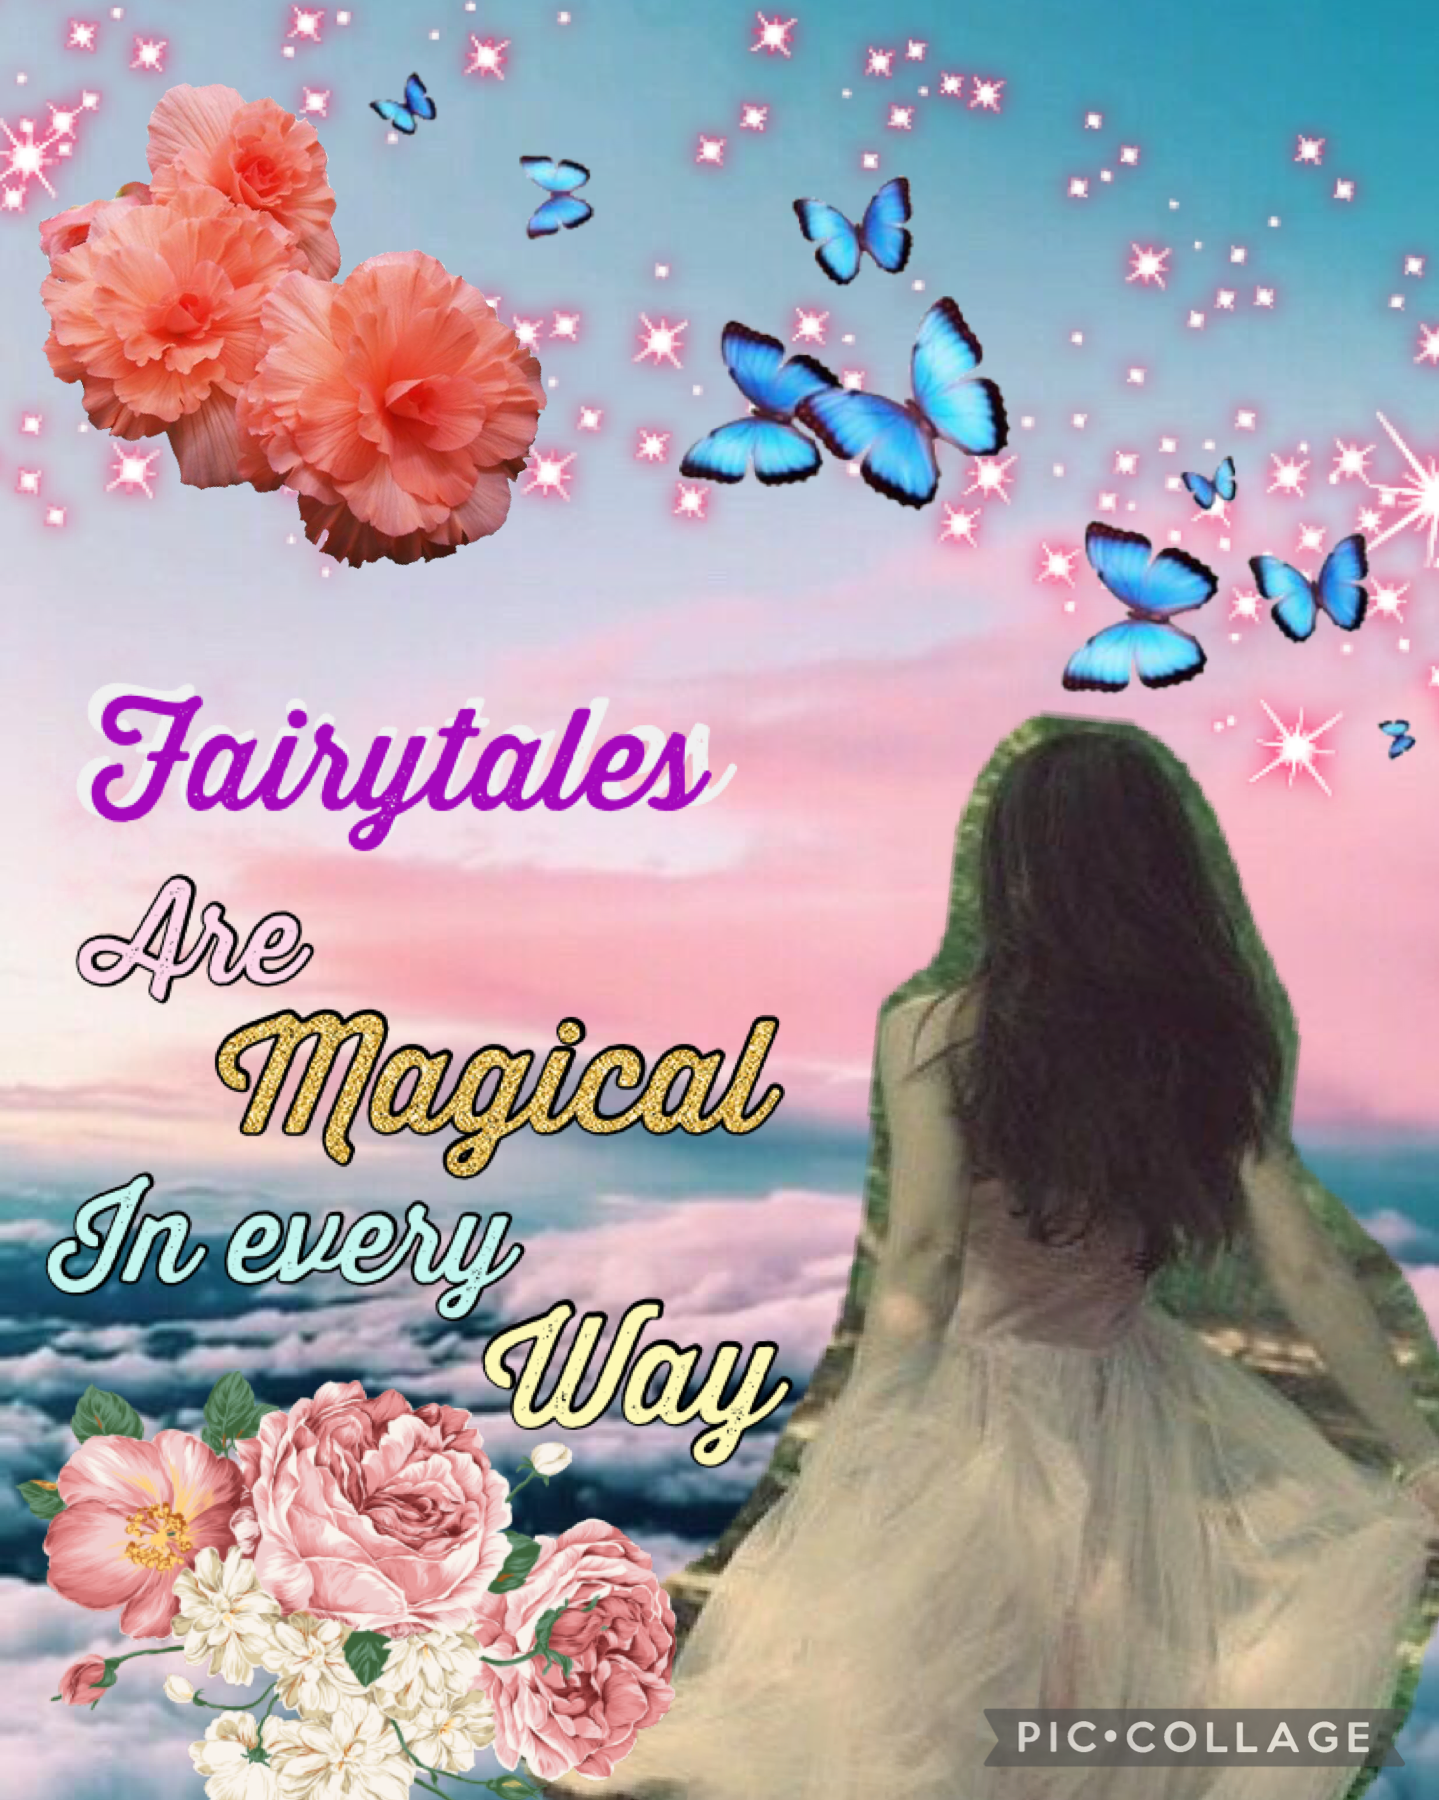 Pastel fairytale aesthetic collage 12.4.21